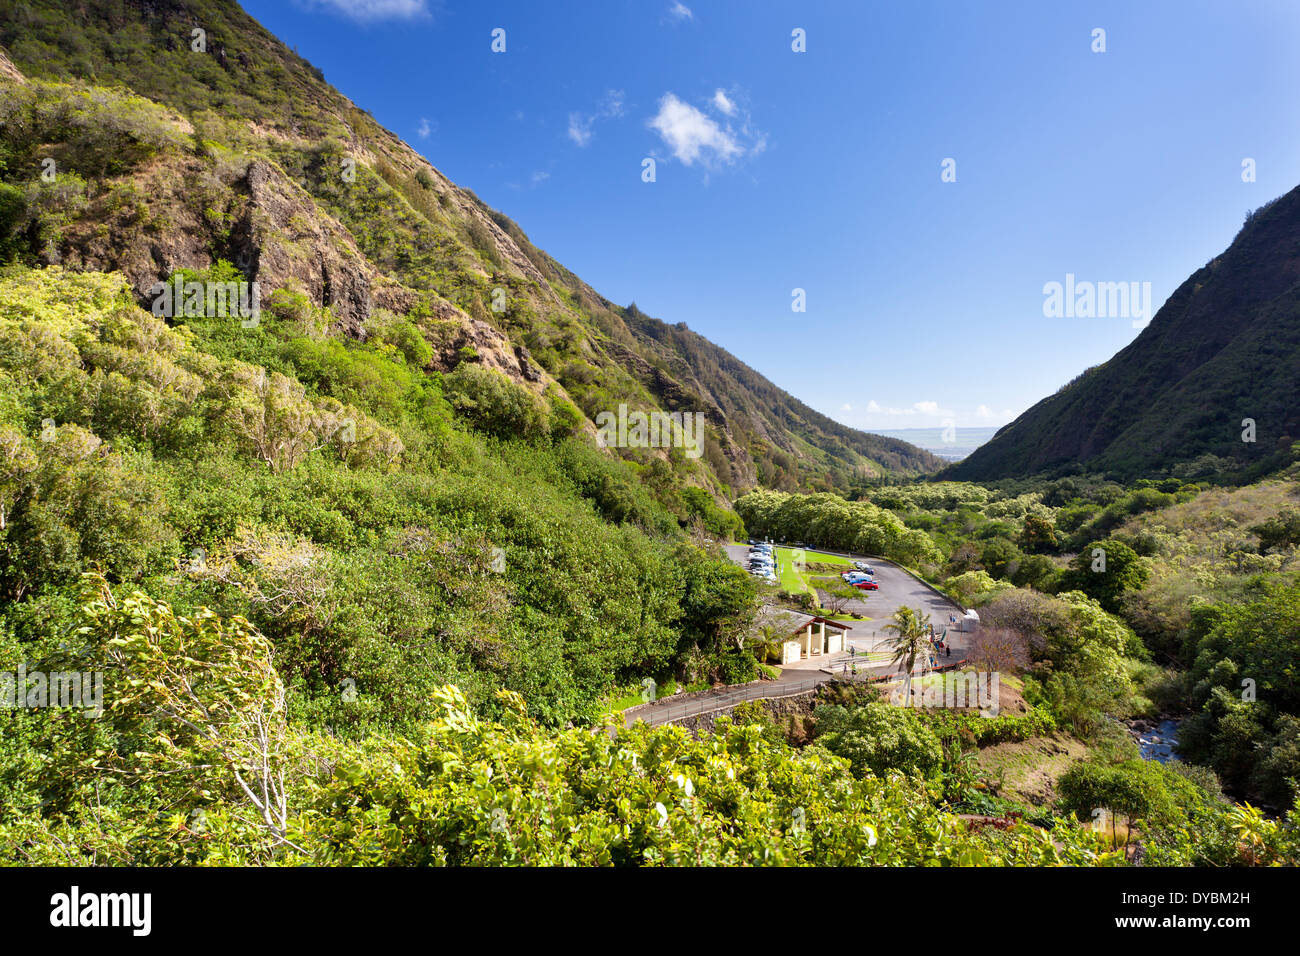 The famous Iao Valley State Park in Maui, Hawaii. Stock Photo